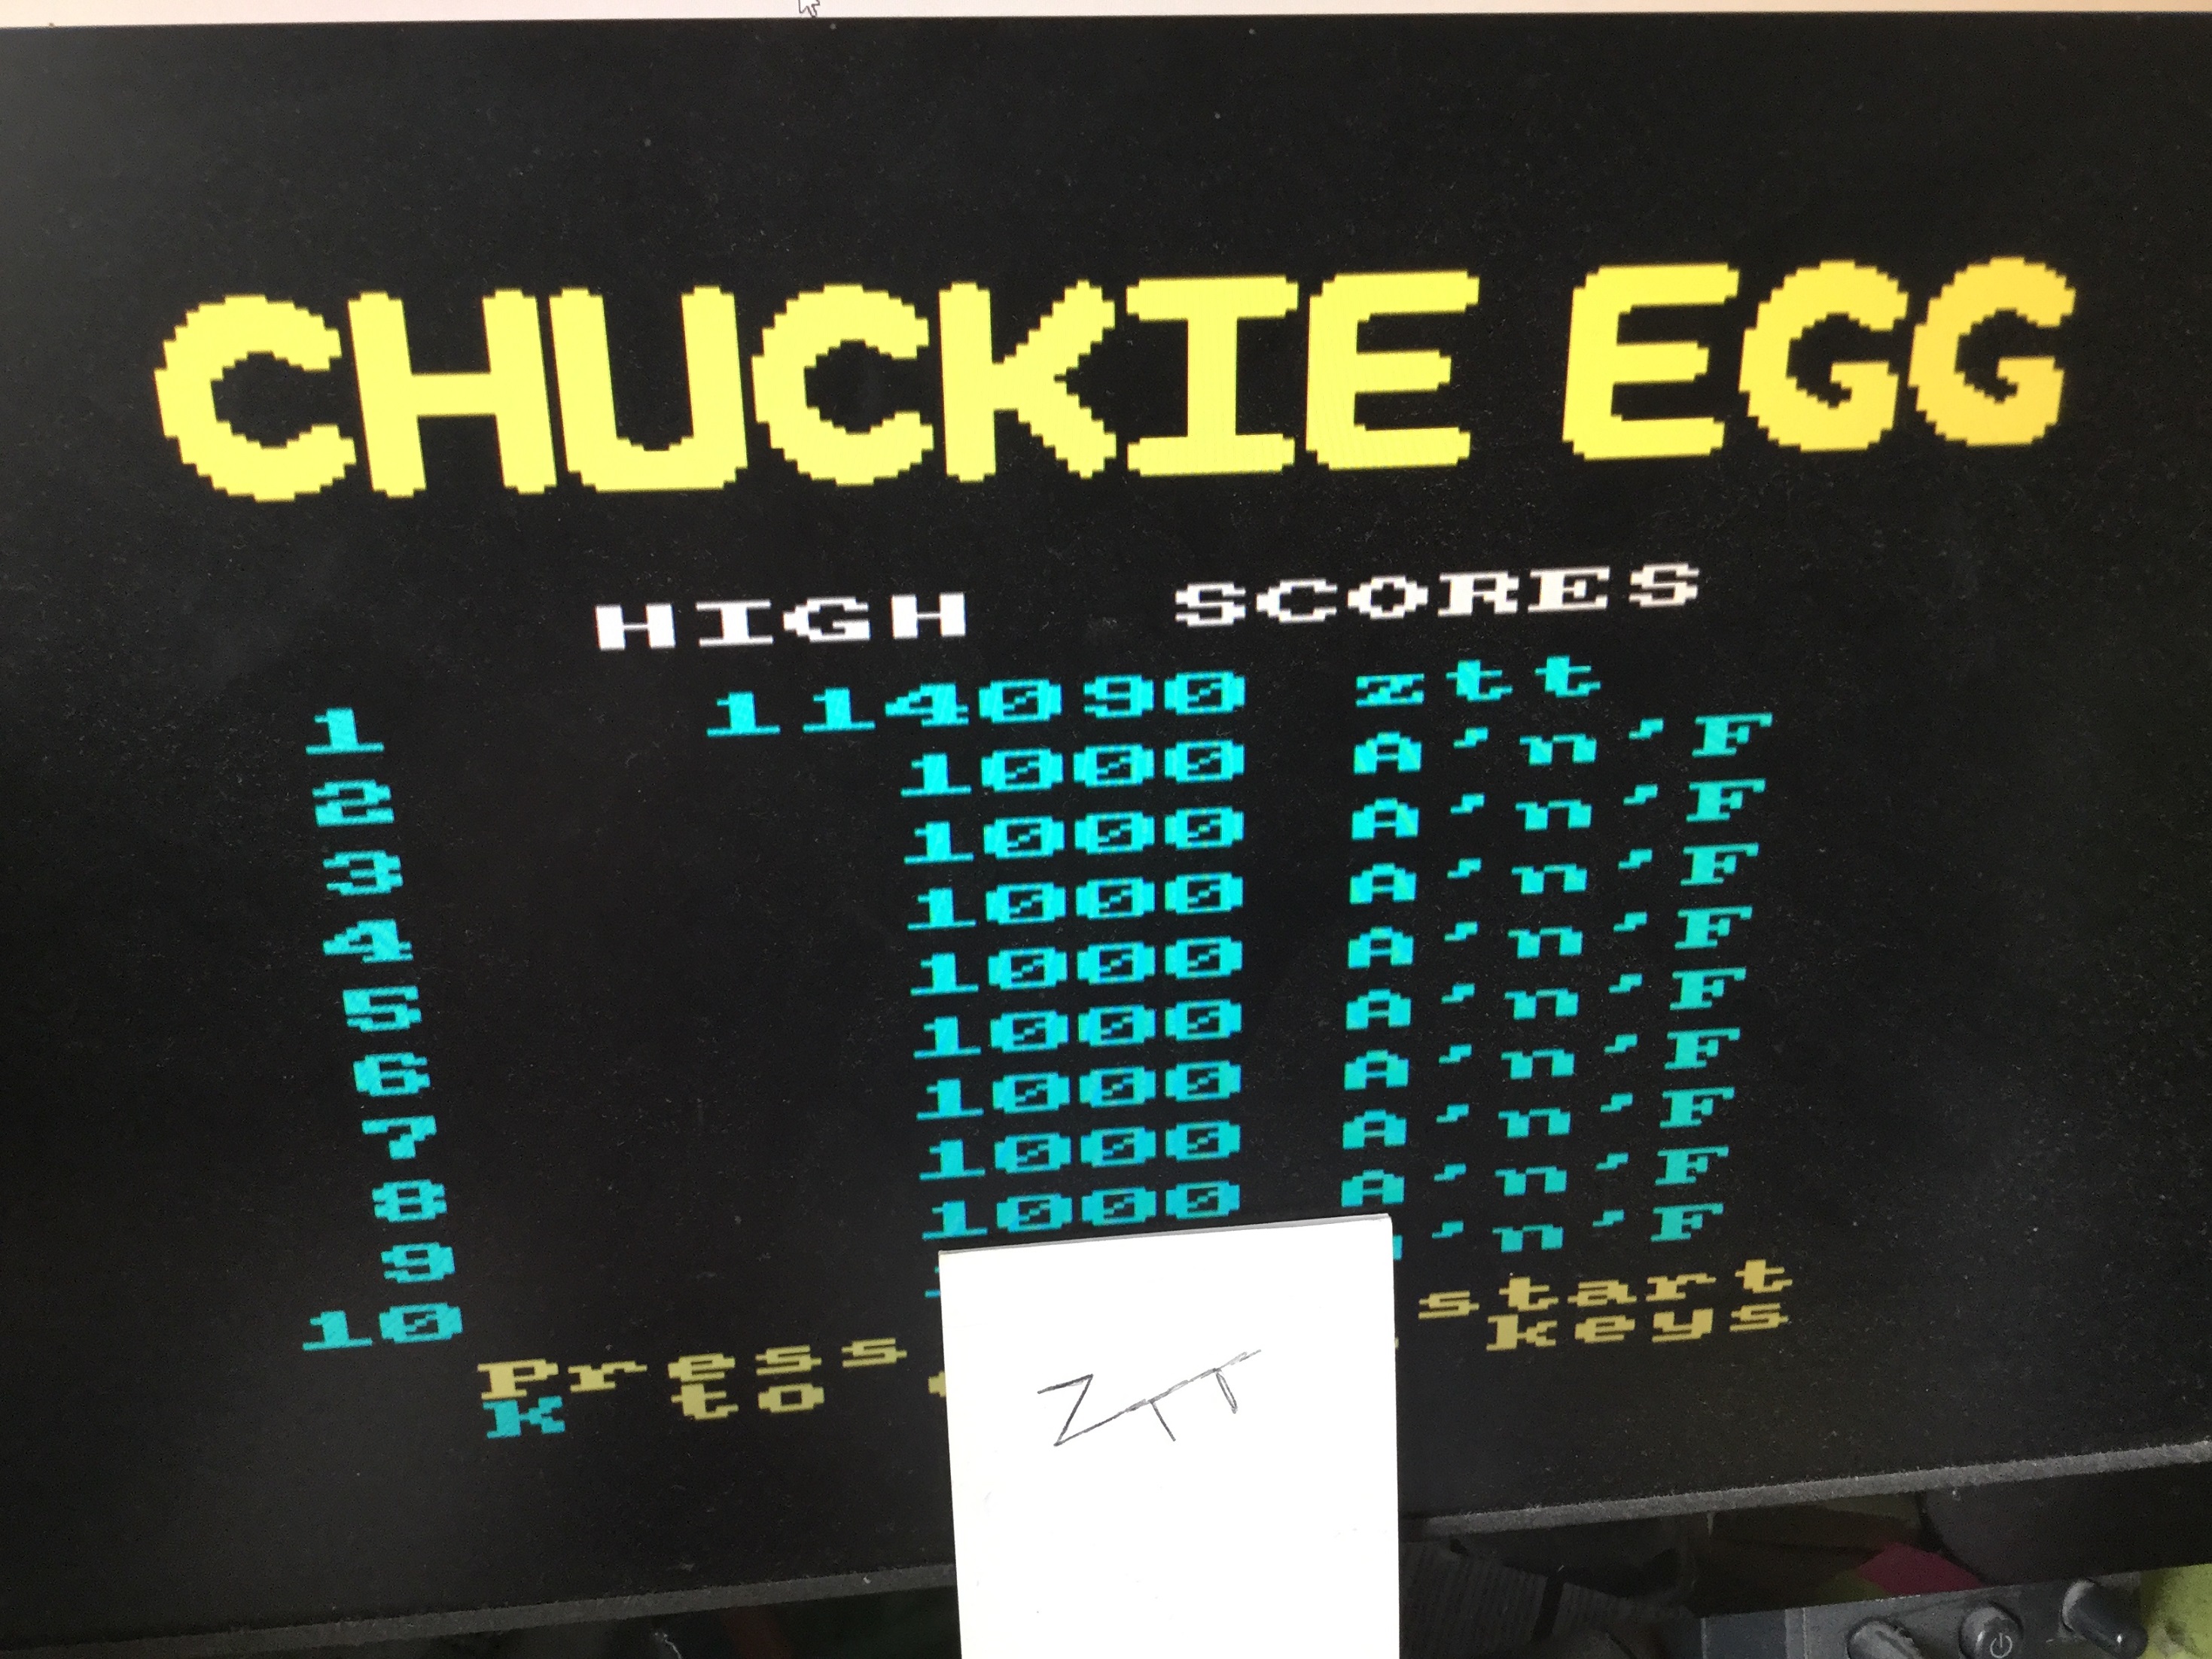 Frankie: Chuckie Egg (Amstrad CPC Emulated) 114,090 points on 2021-02-14 05:05:14